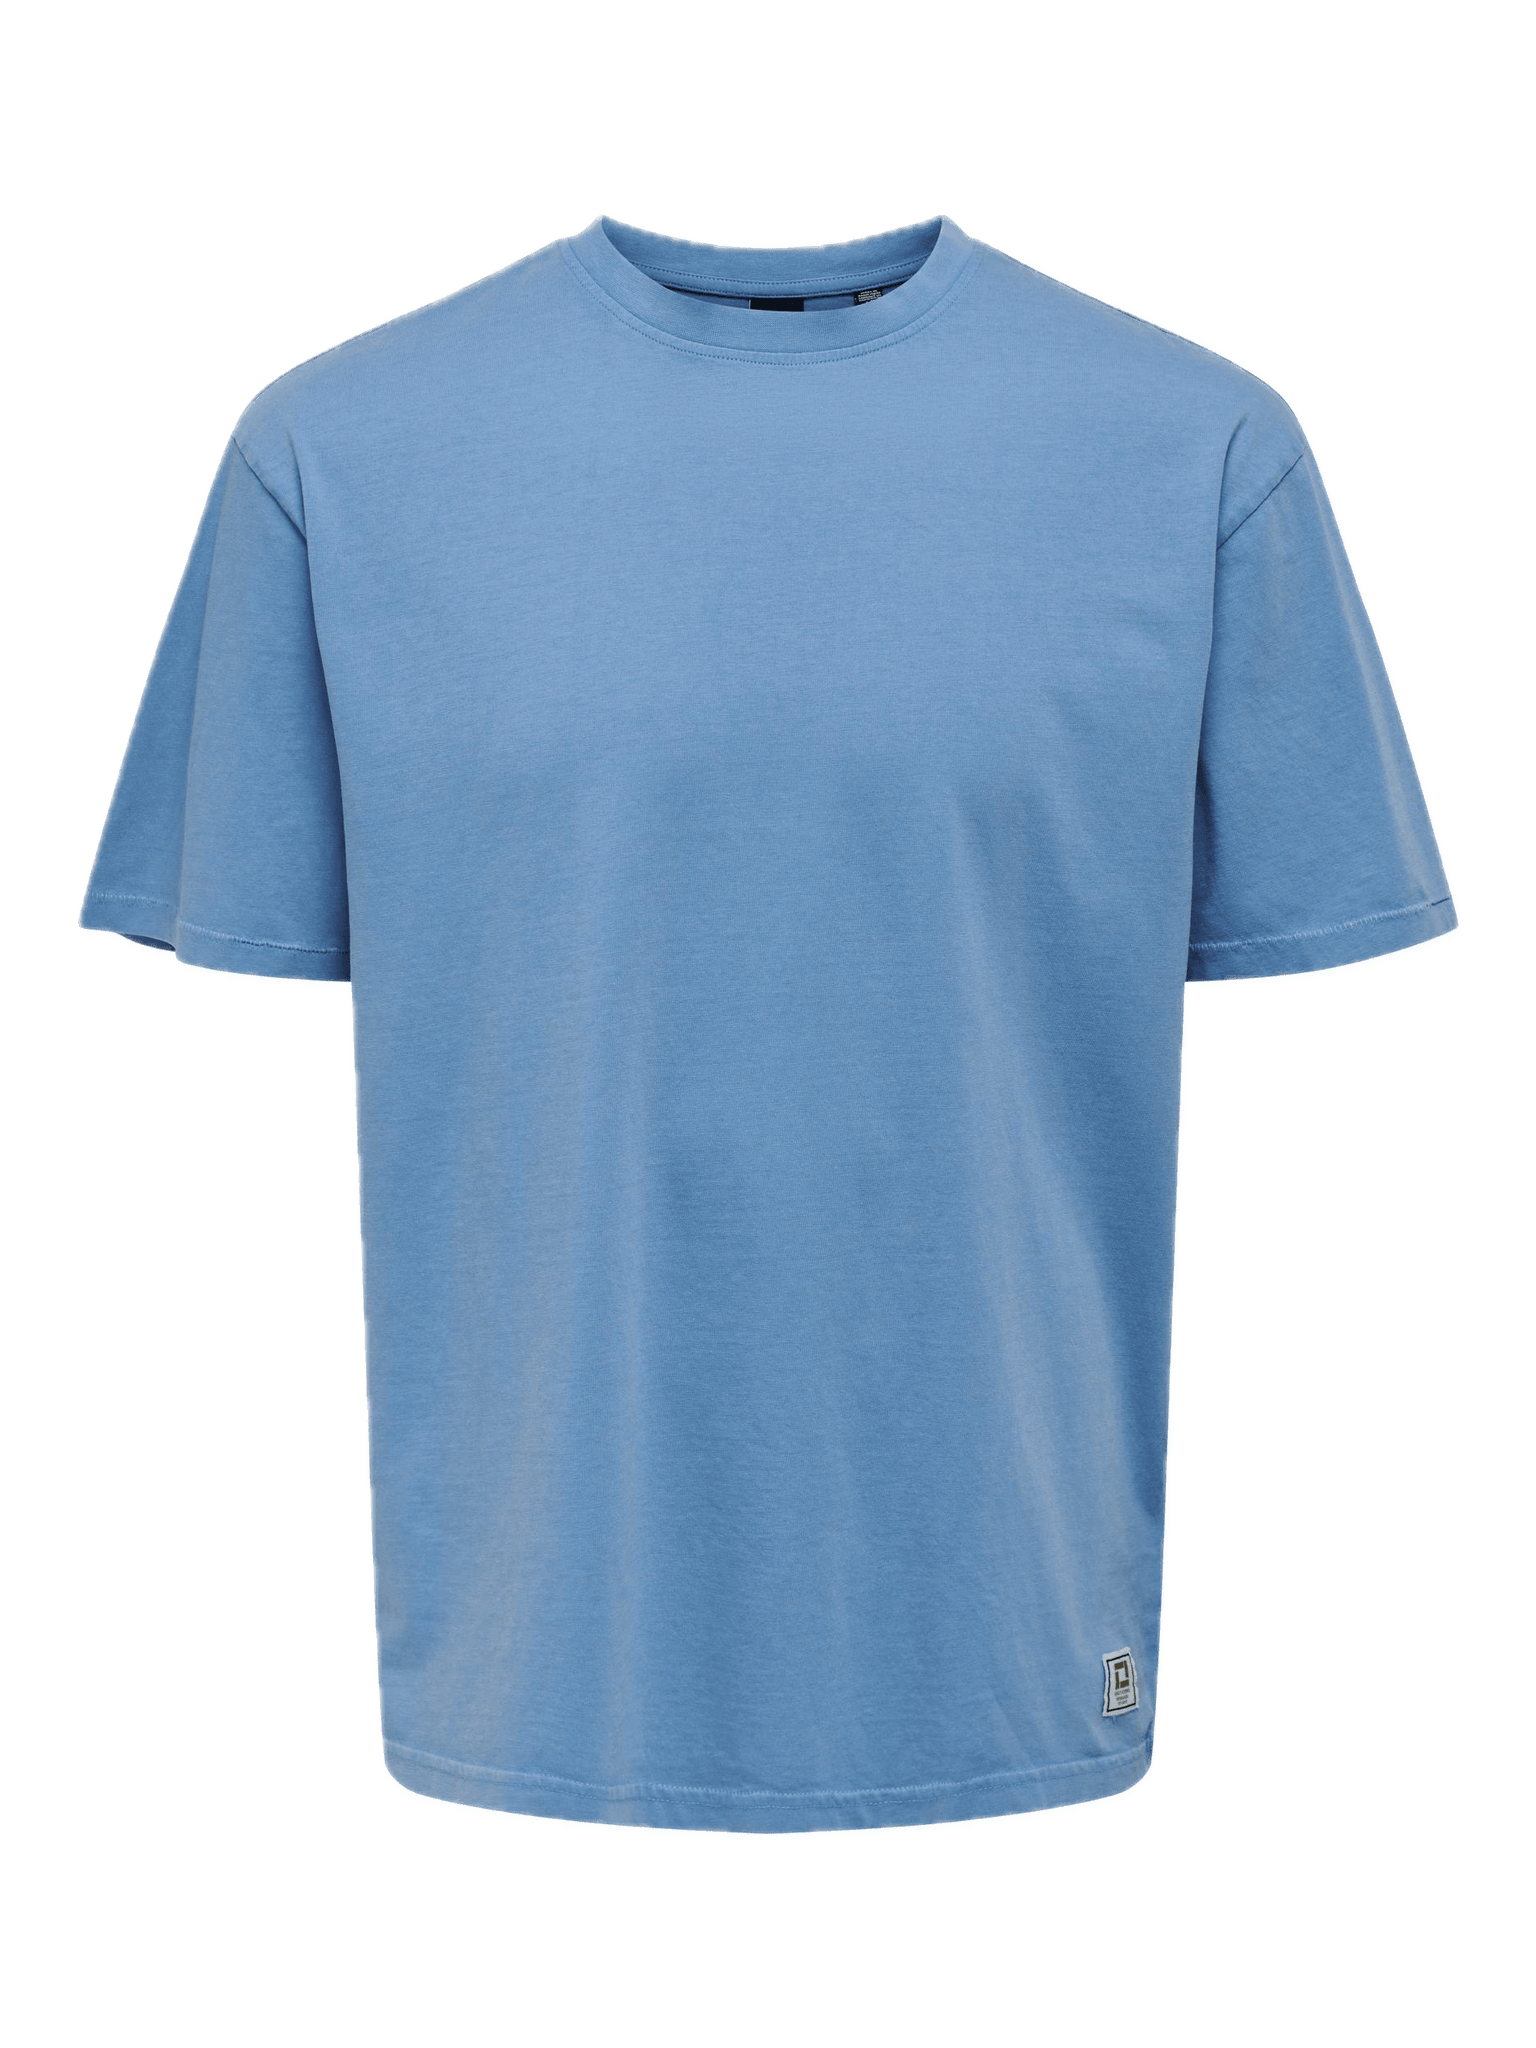 Camiseta Only & Sons Ron Blissful Blue - ECRU